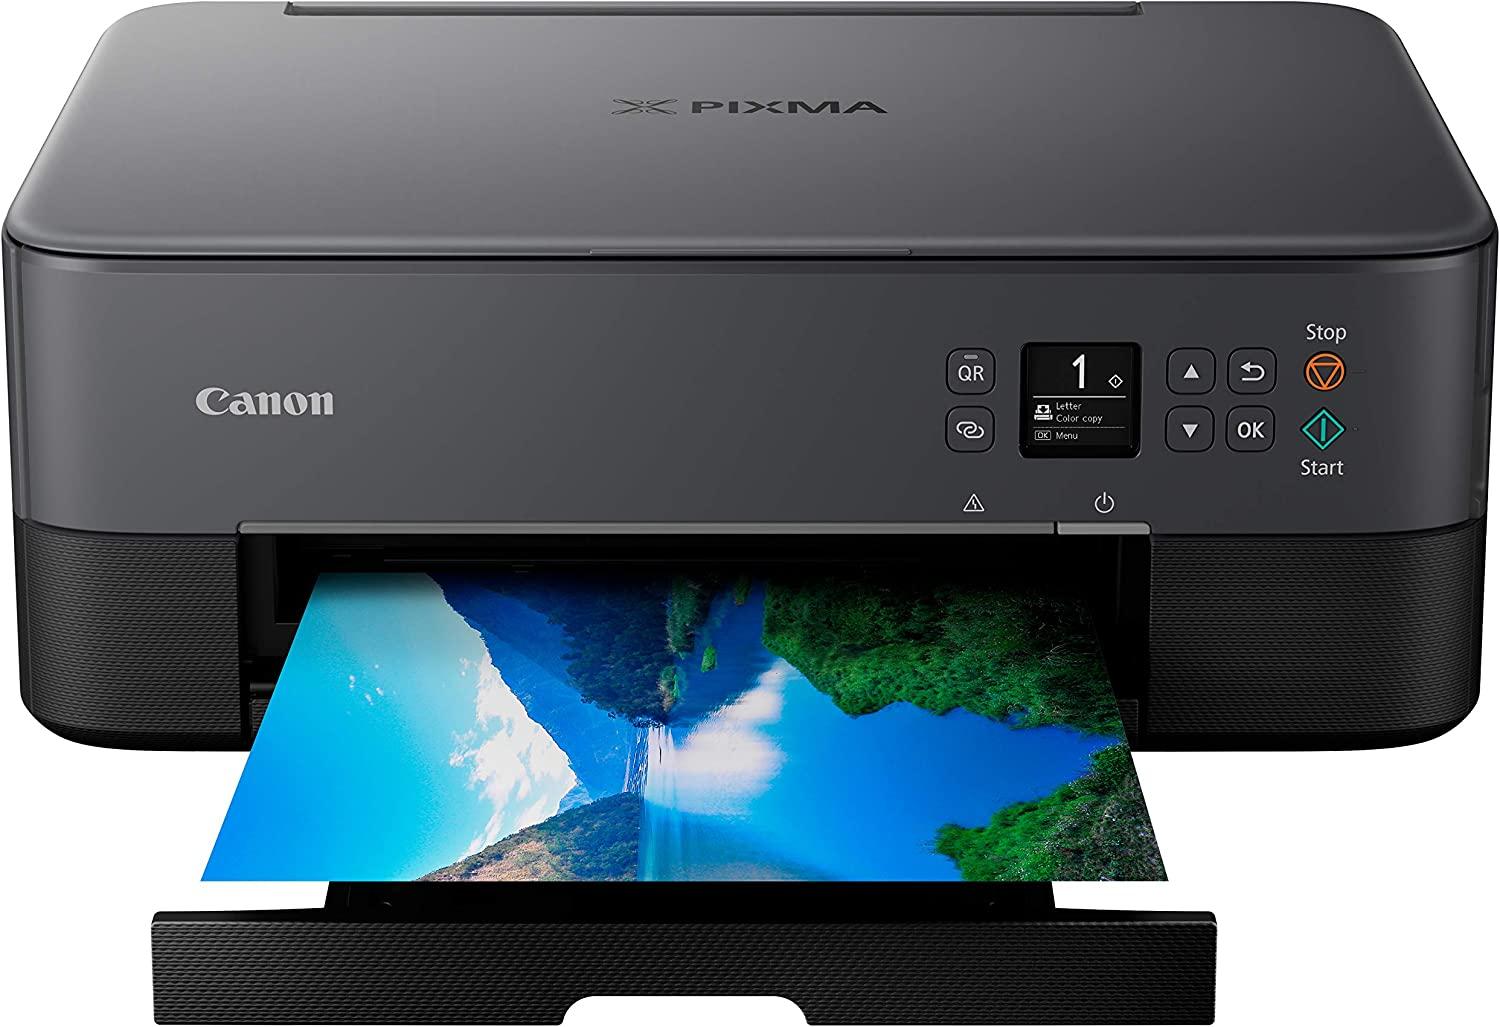 Canon PIXMA TS6420a All-in-One Wireless Color Inkjet Printer for $54.99 Shipped